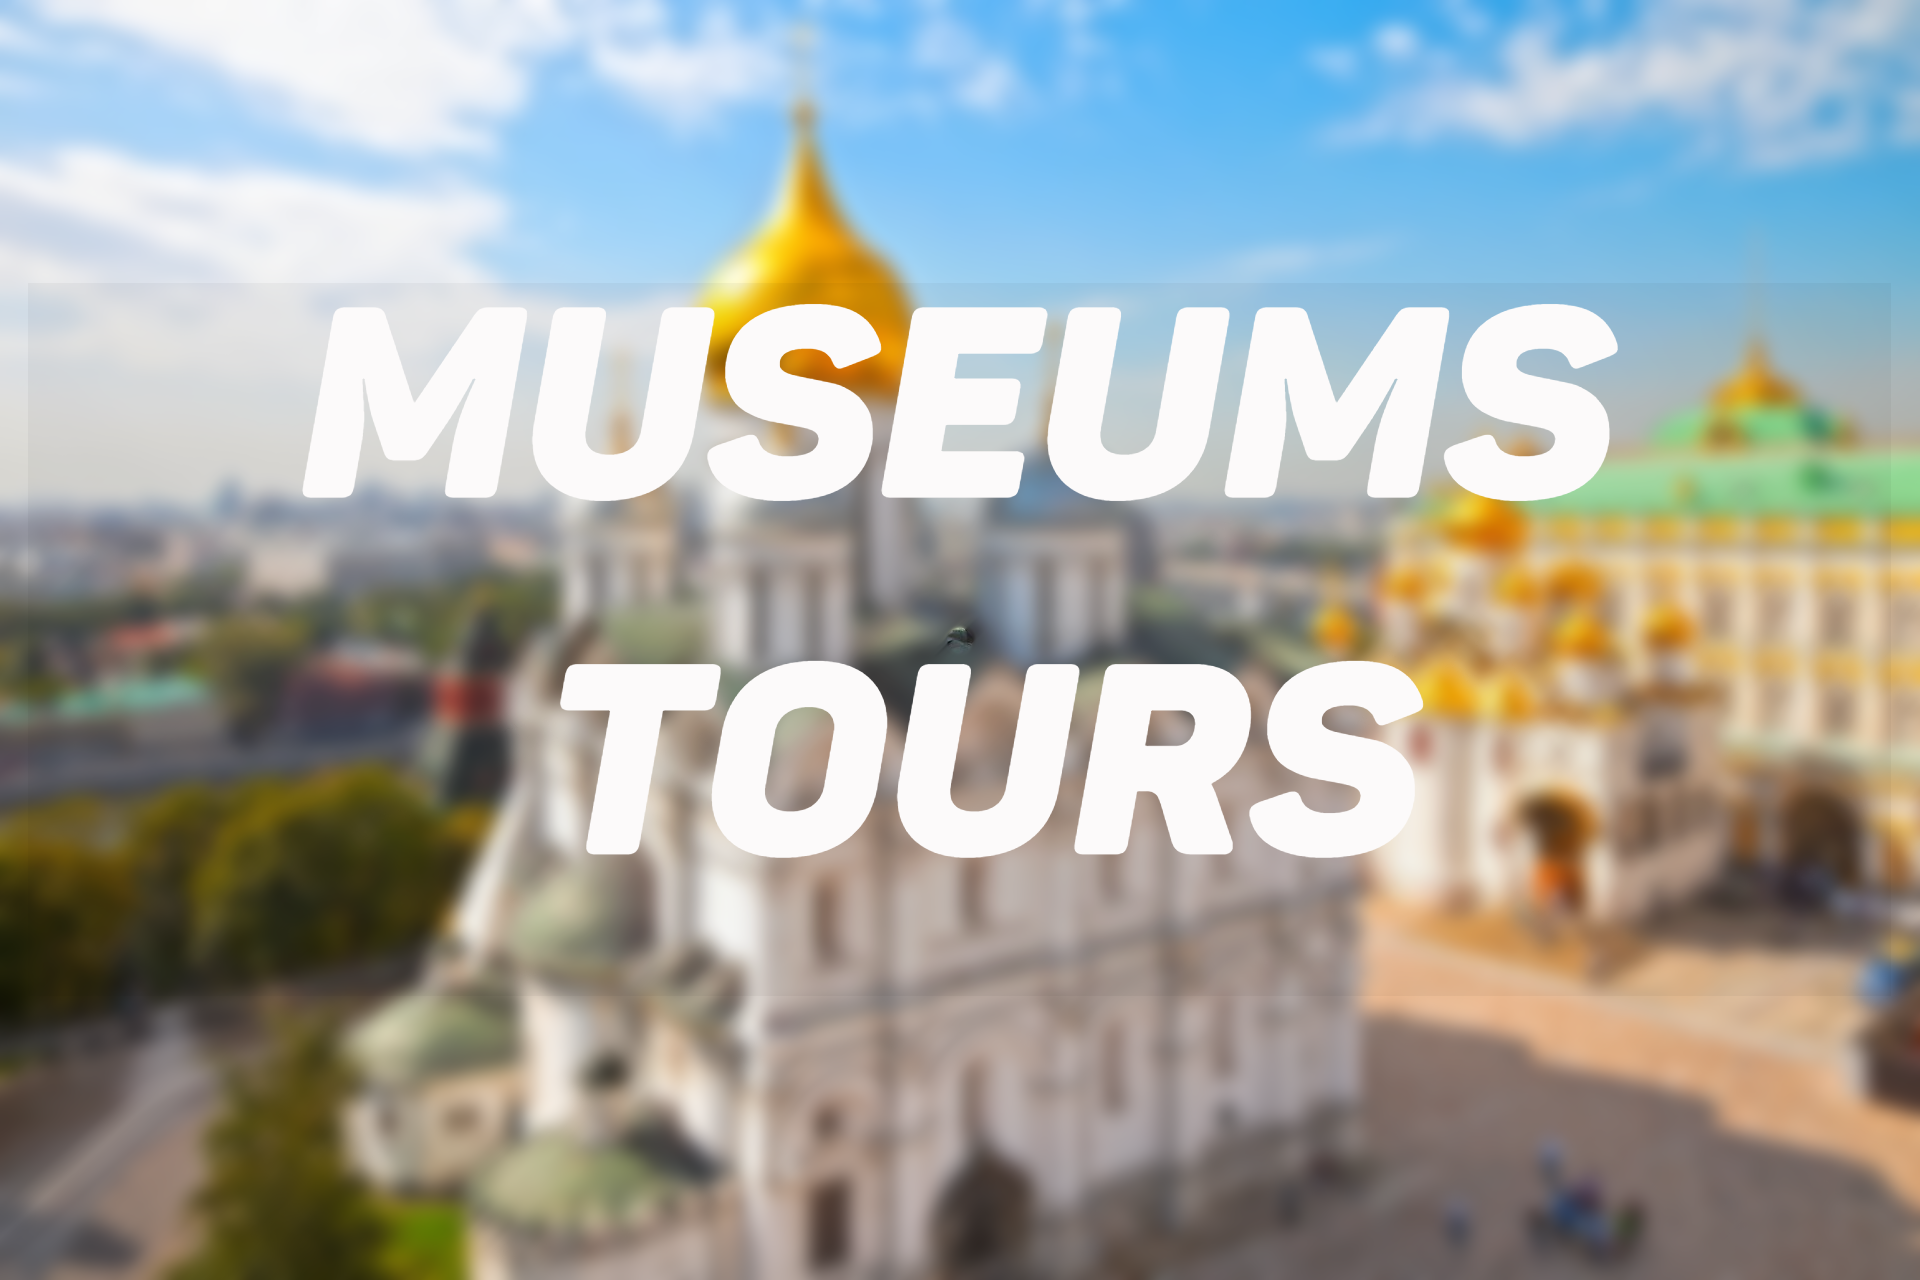 Moscow Museums Tours